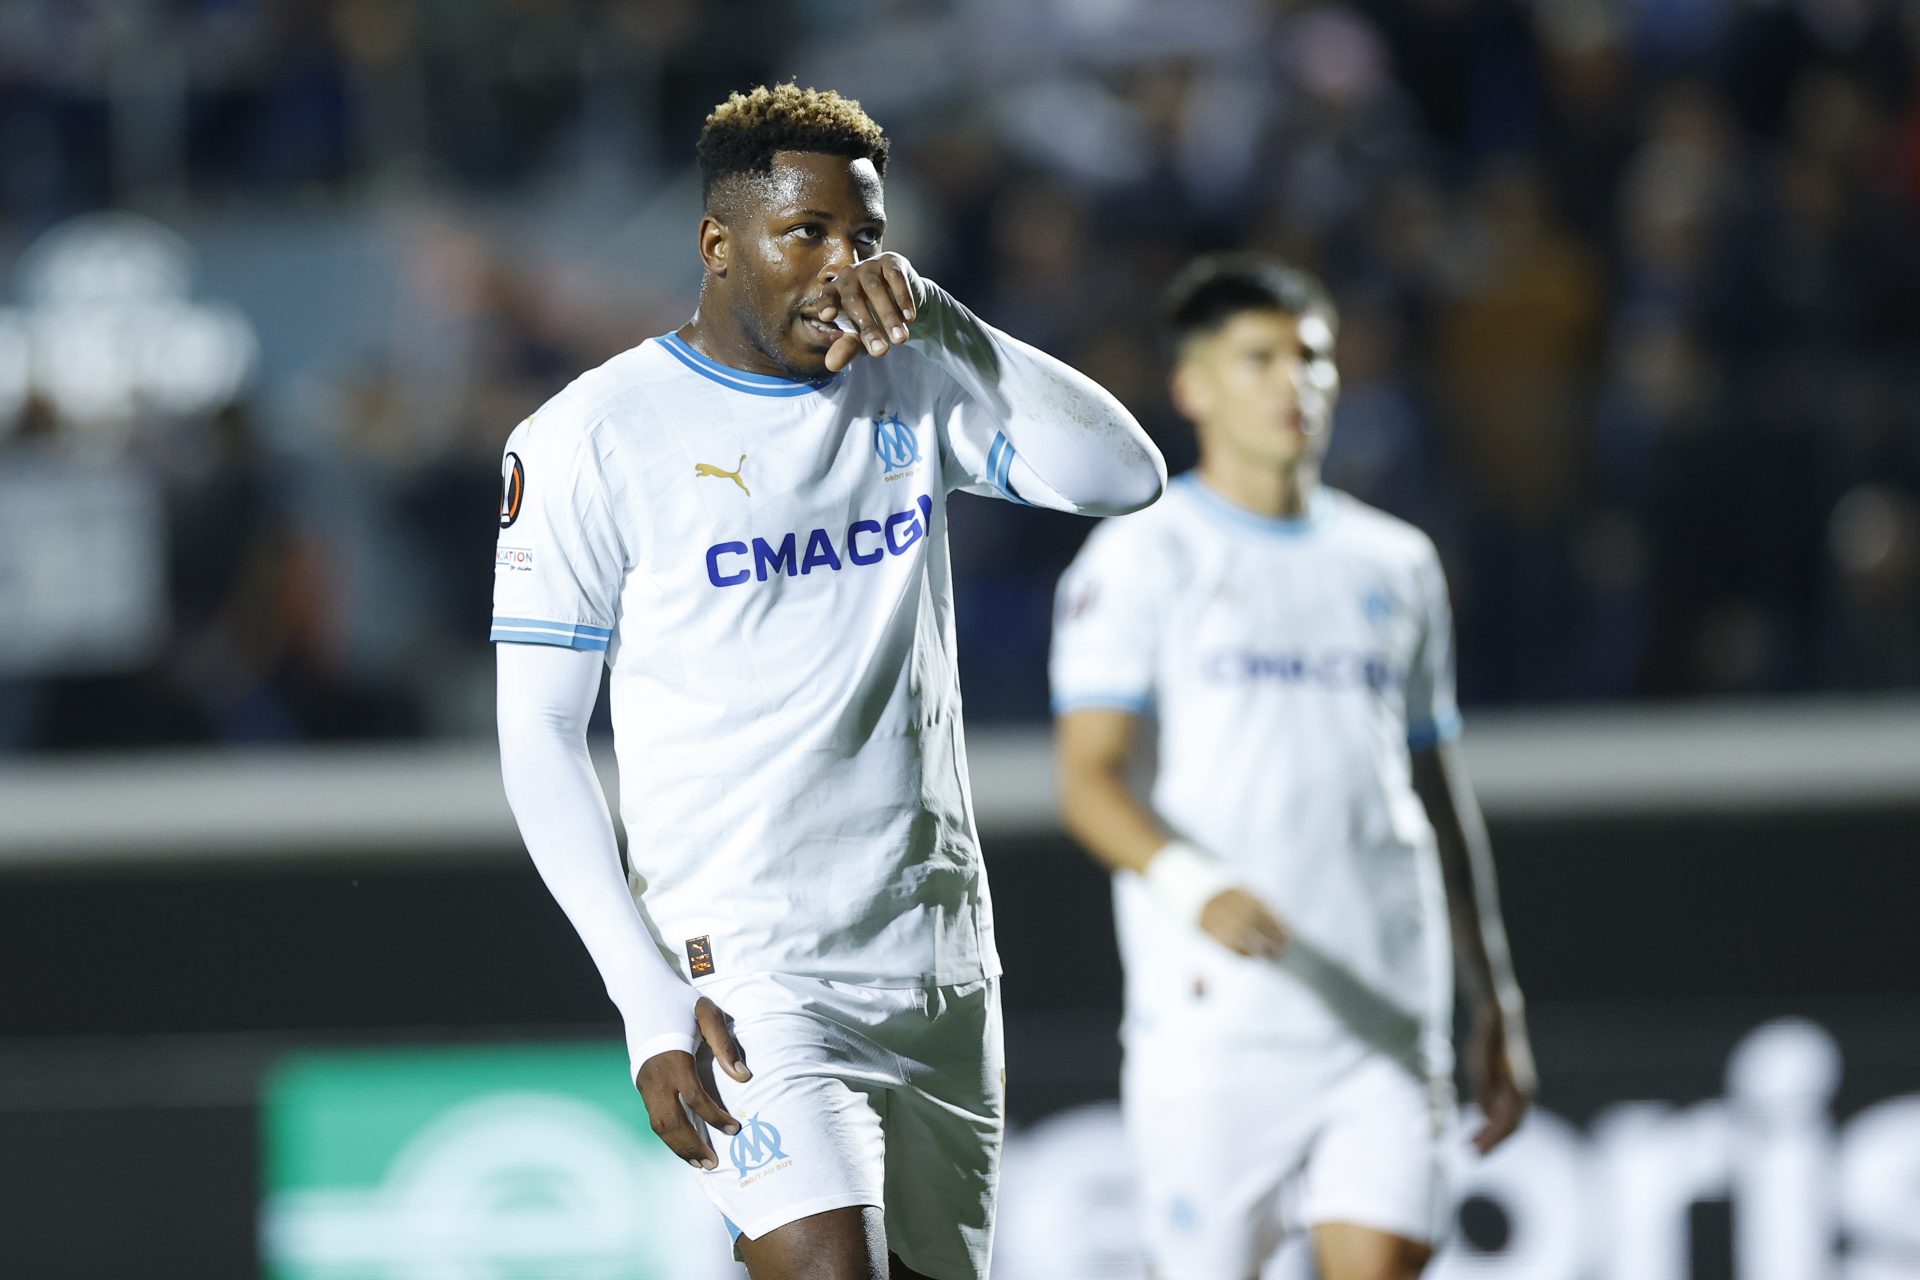 Two Olympique de Marseille players shot at in horrific carjacking attempt